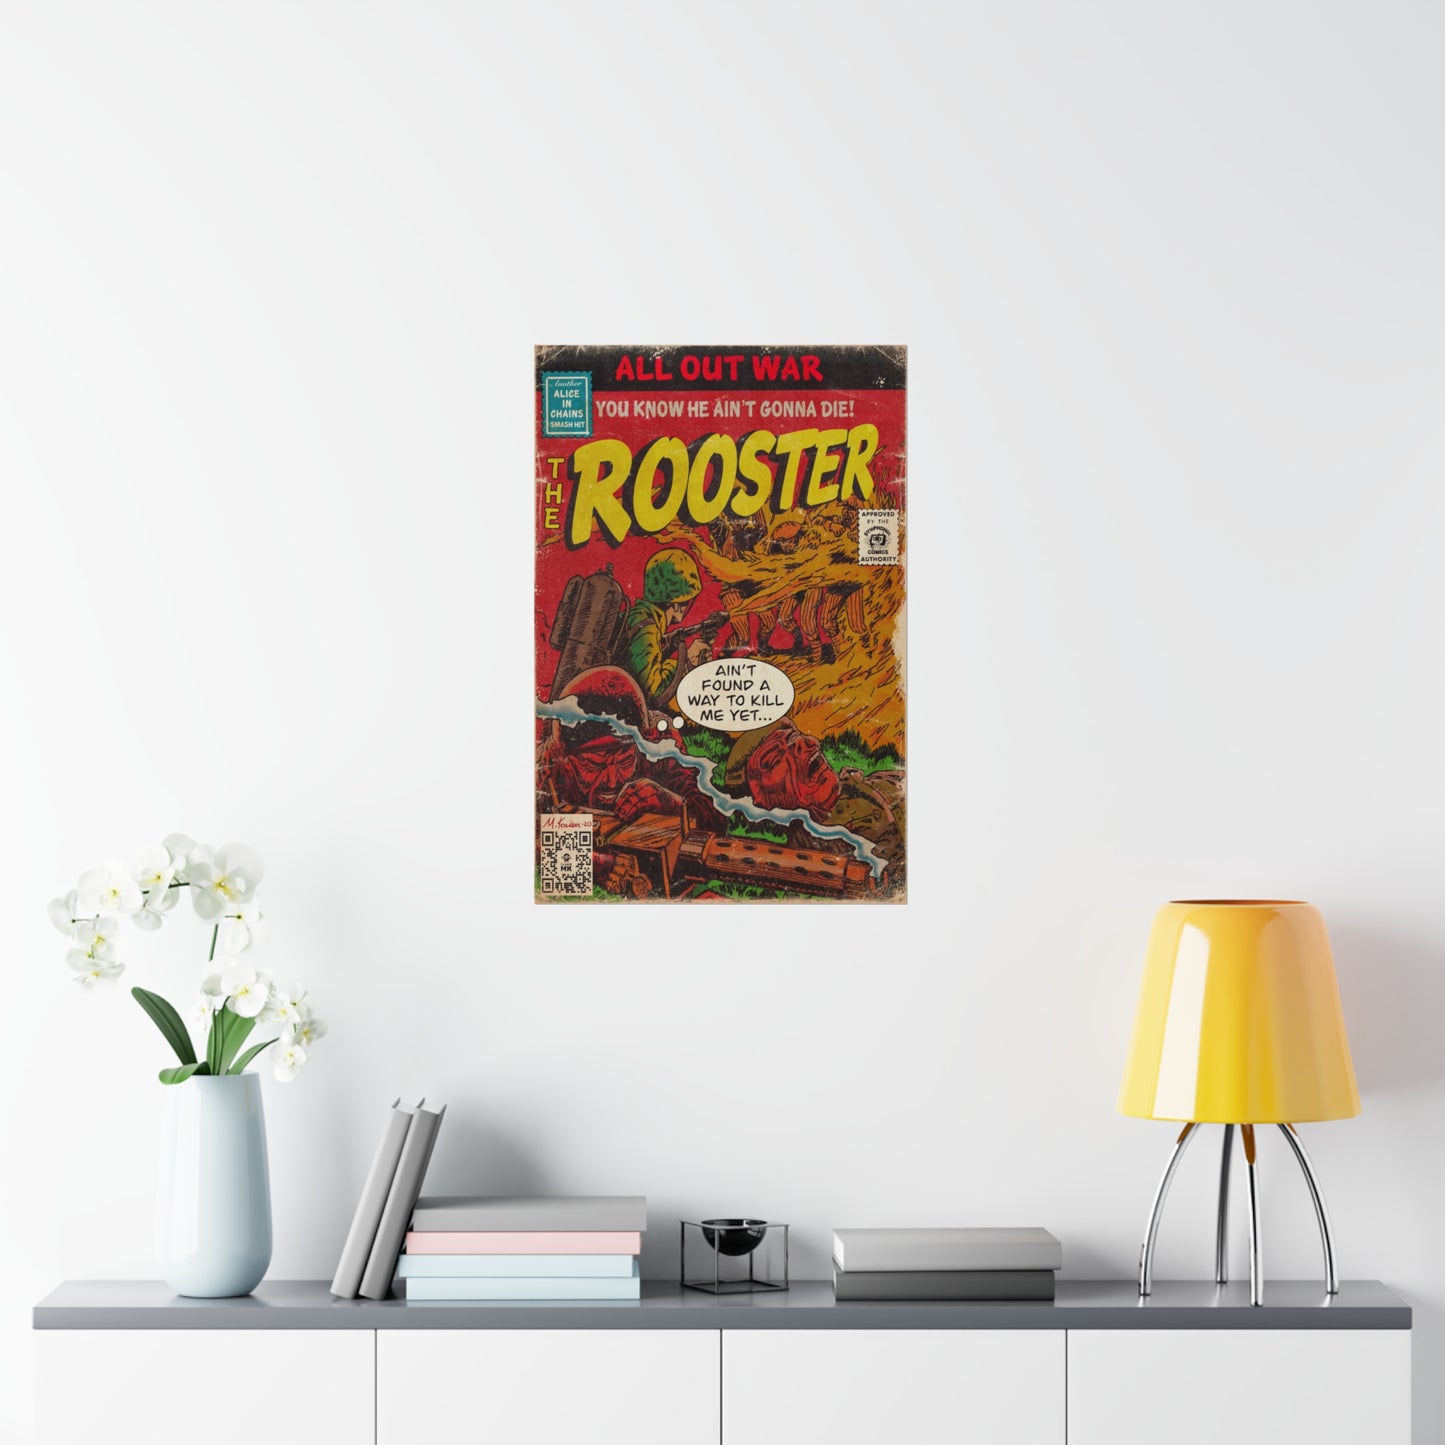 Alice In Chains - Rooster - Vertical Matte Poster